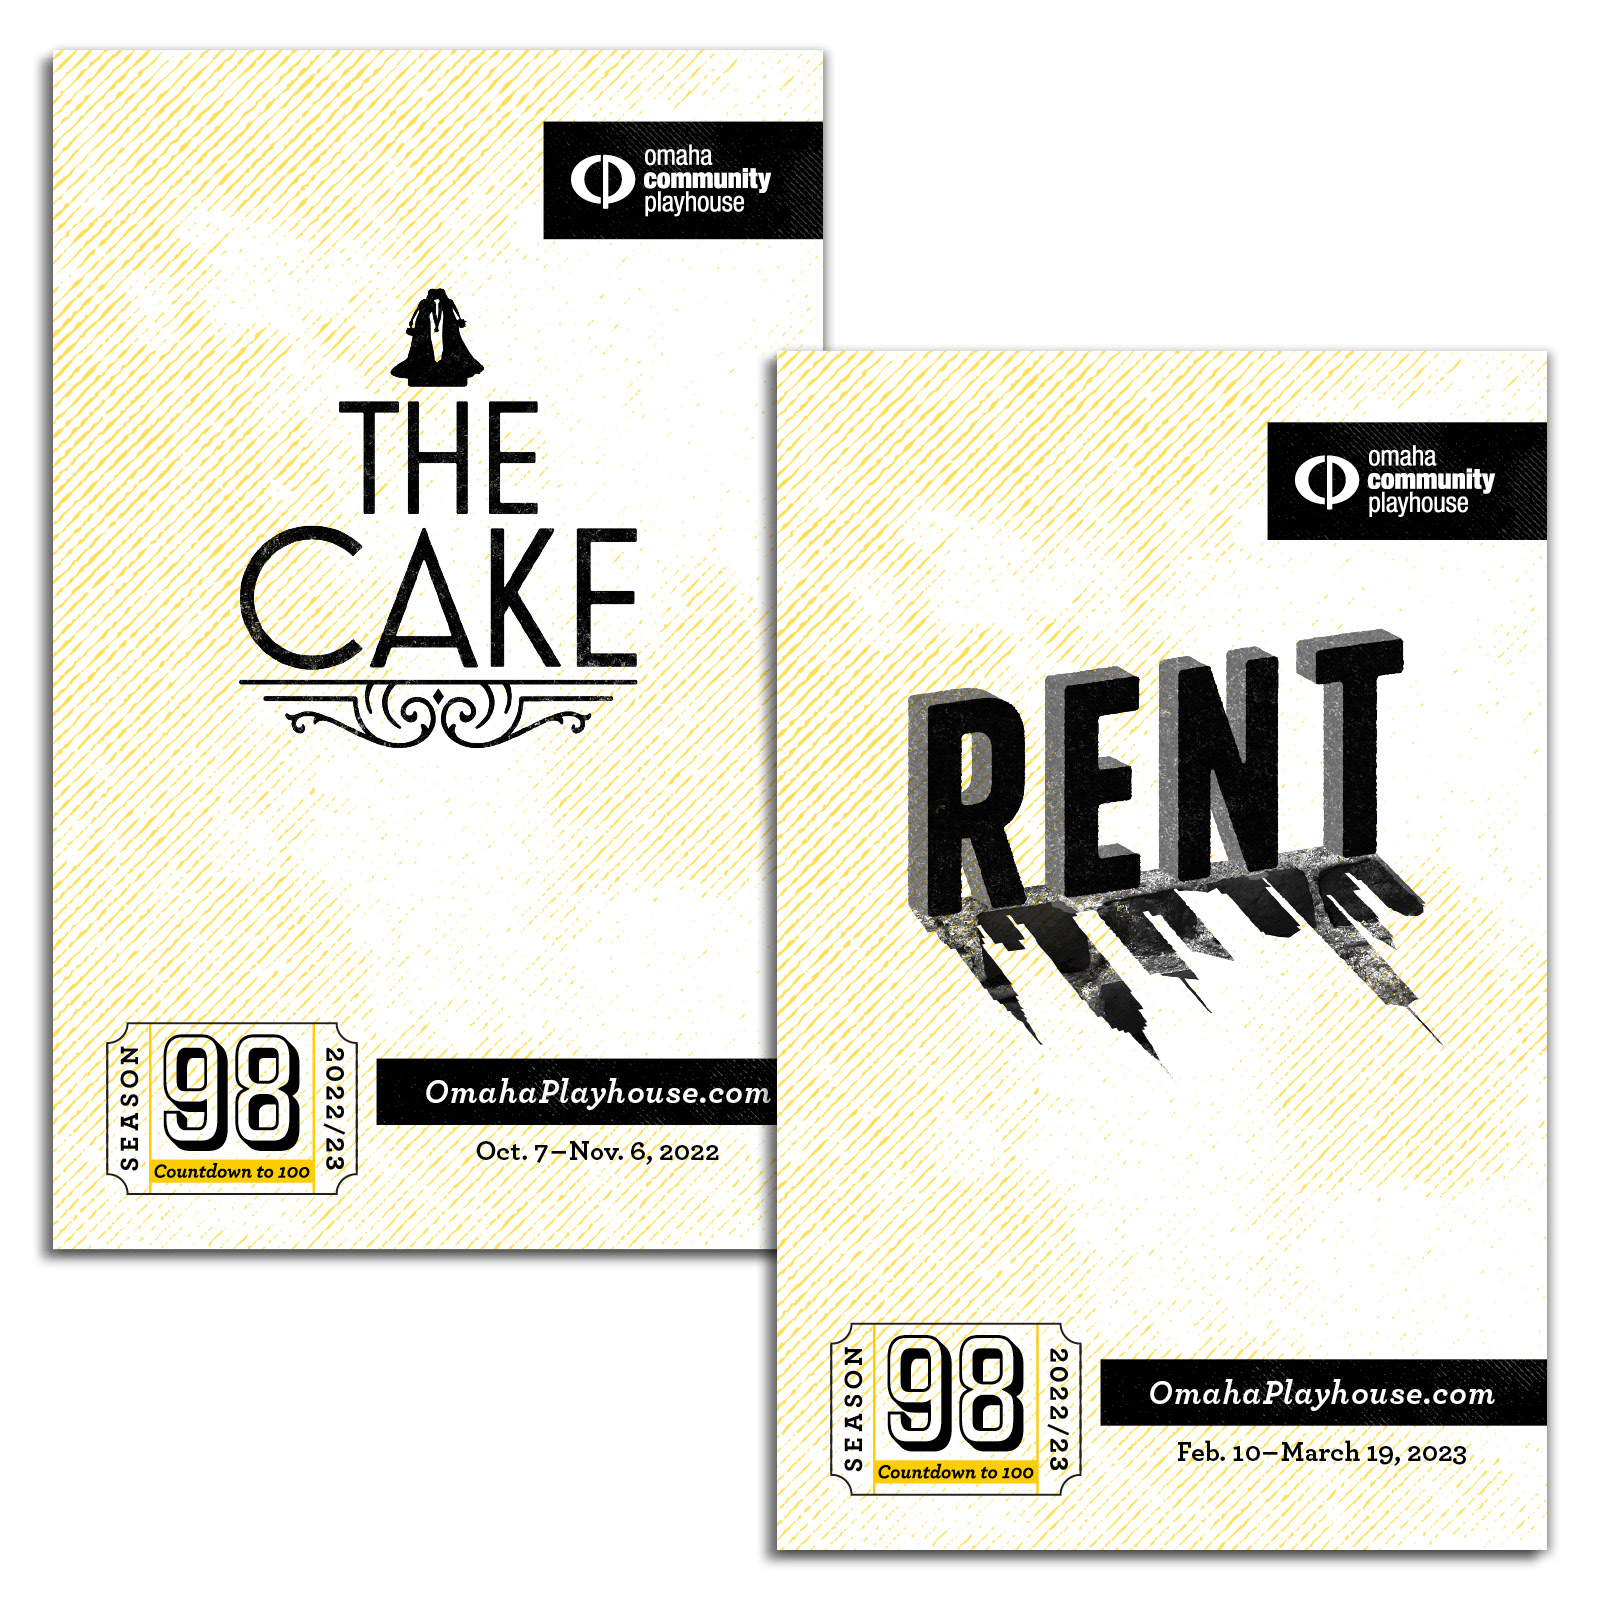 Program book covers for The Cake and RENT